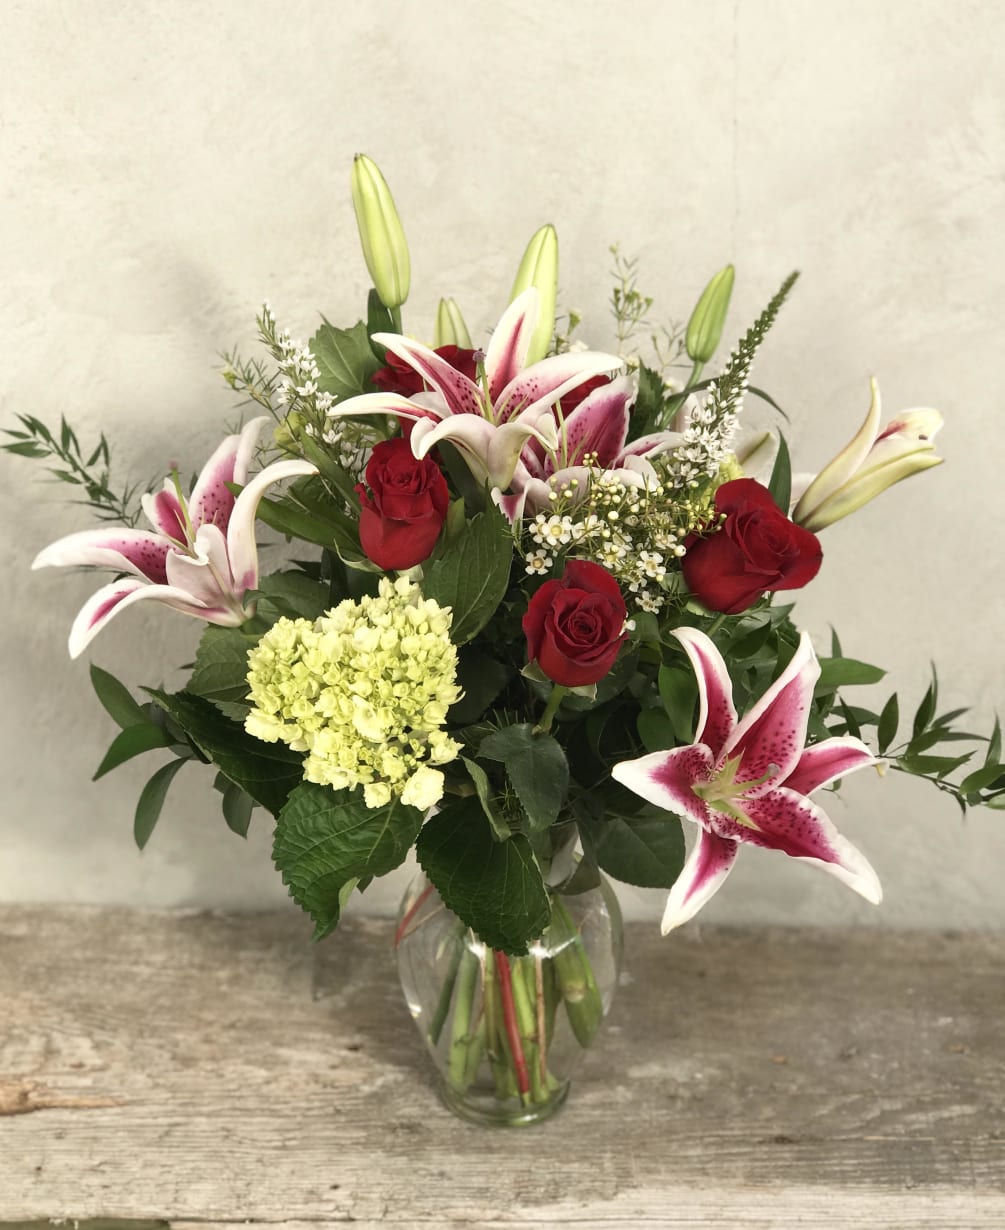 Dazzle your sweetheart with this beautiful arrangement of red roses, stargazer lilies